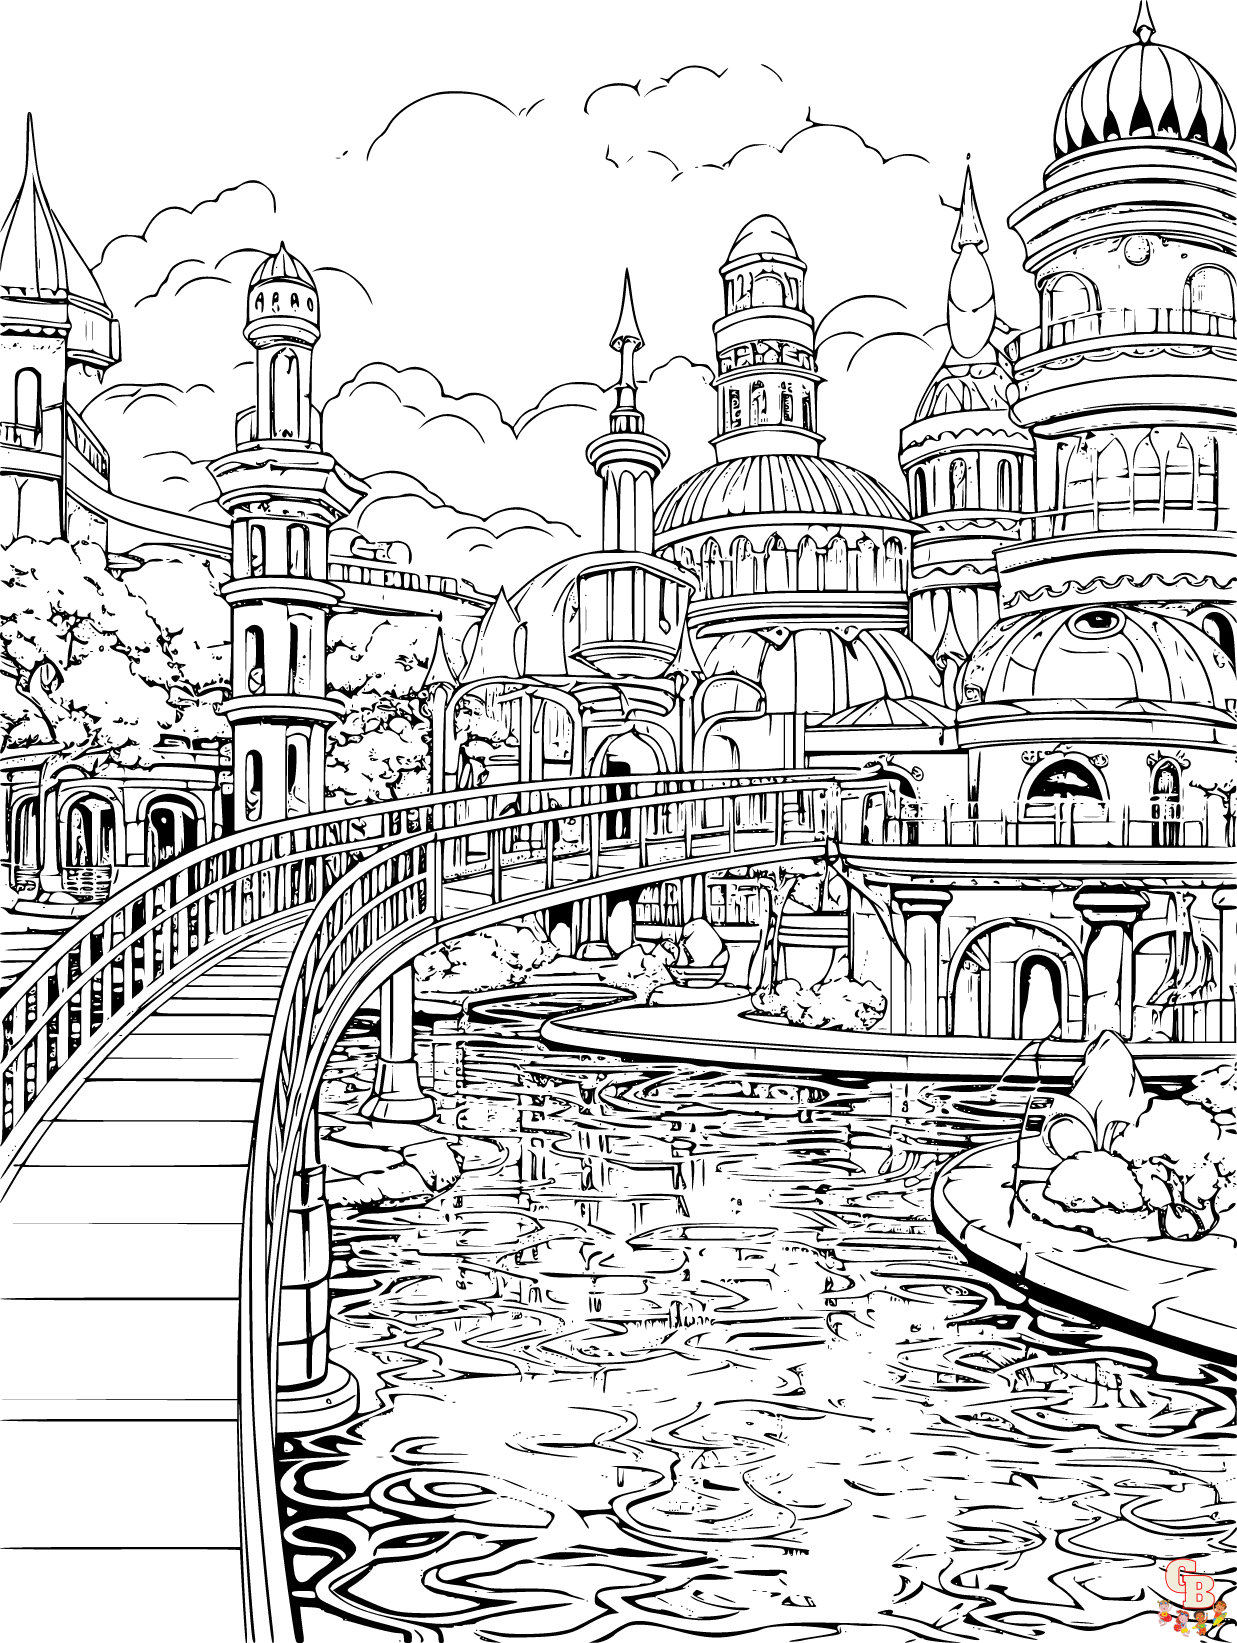 waterpark coloring pages to print